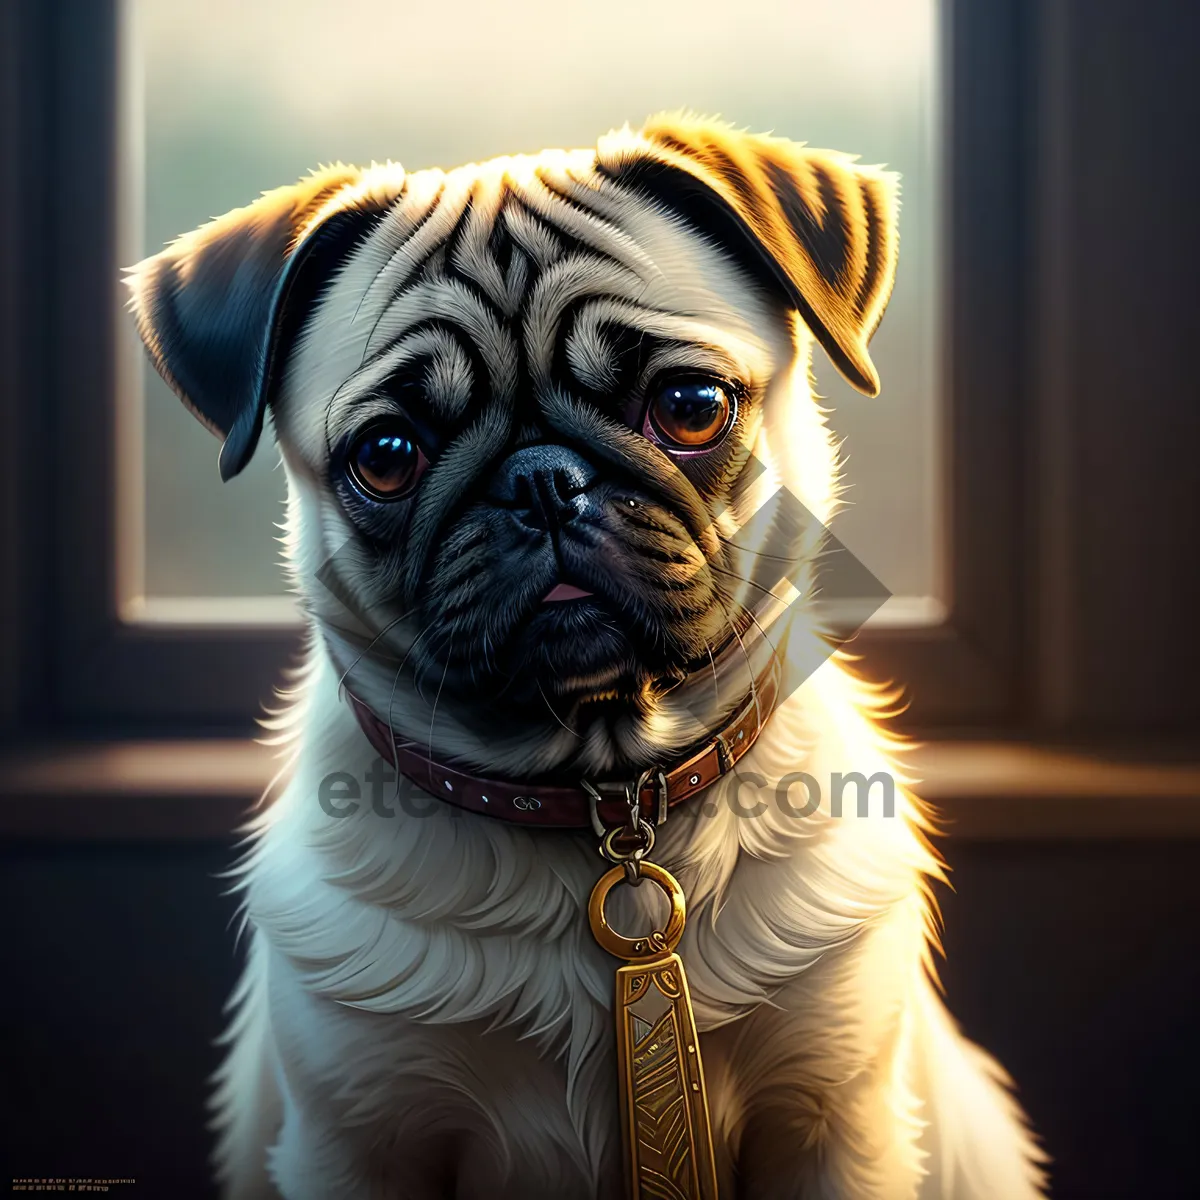 Picture of Cute Wrinkly Pug Puppy - Adorable Studio Portrait